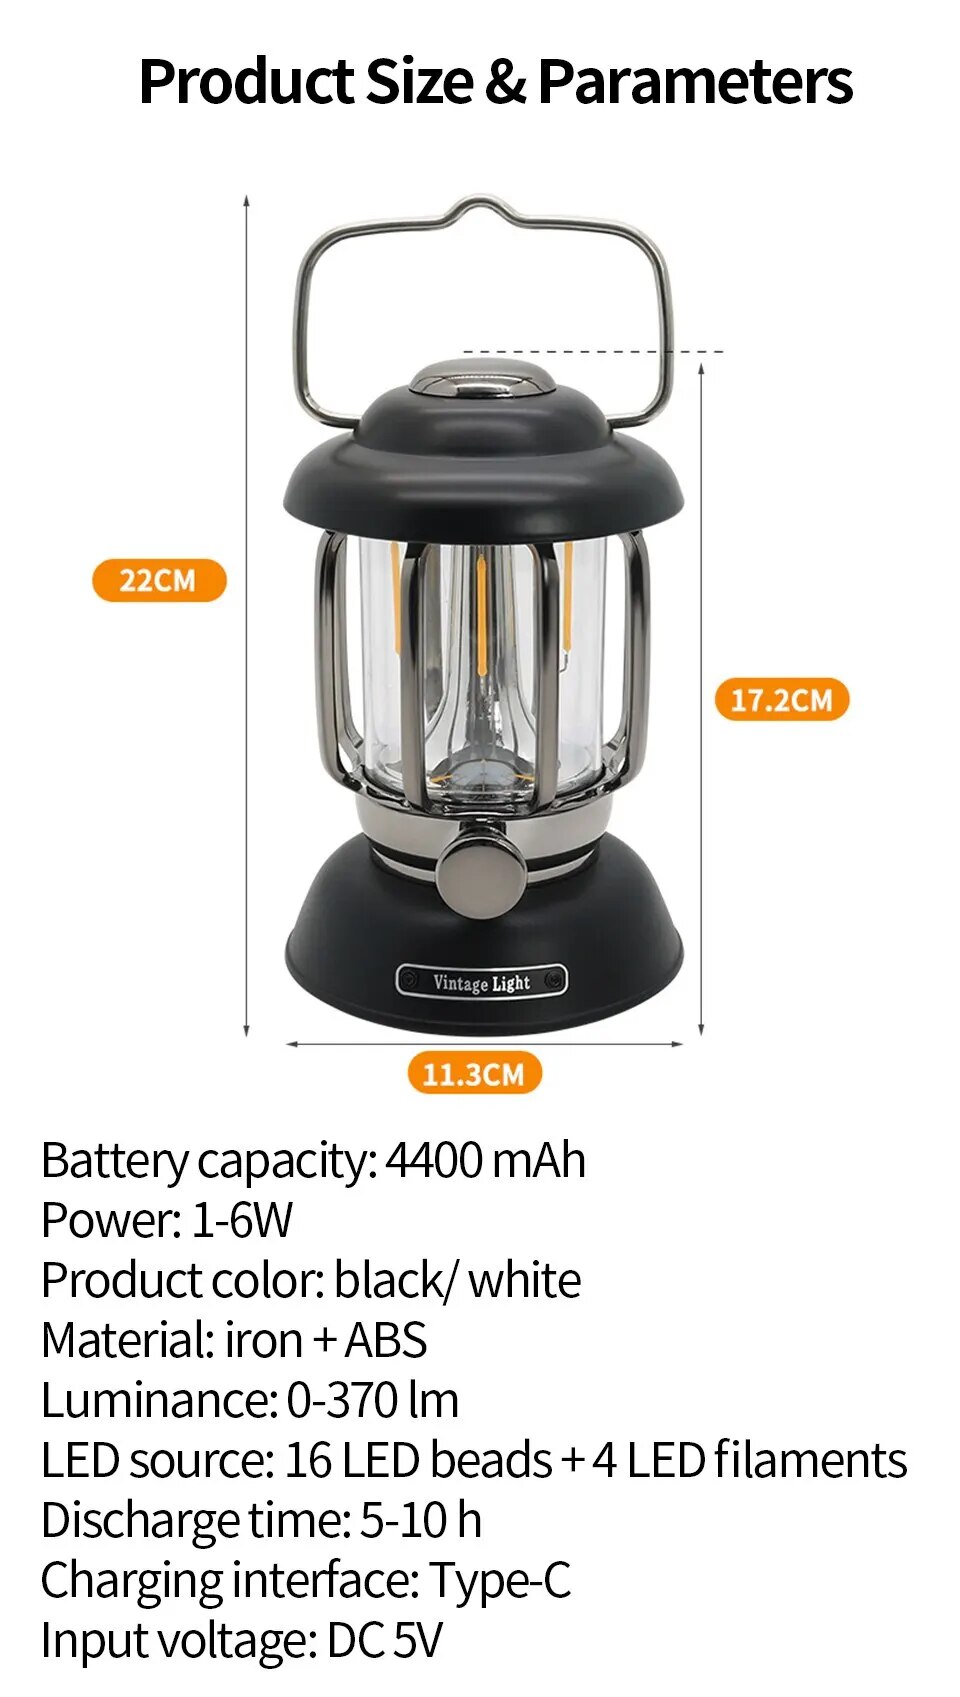 come4buy.com-Outdoor Camping Lantern Portable USB Rechargeable Lamp